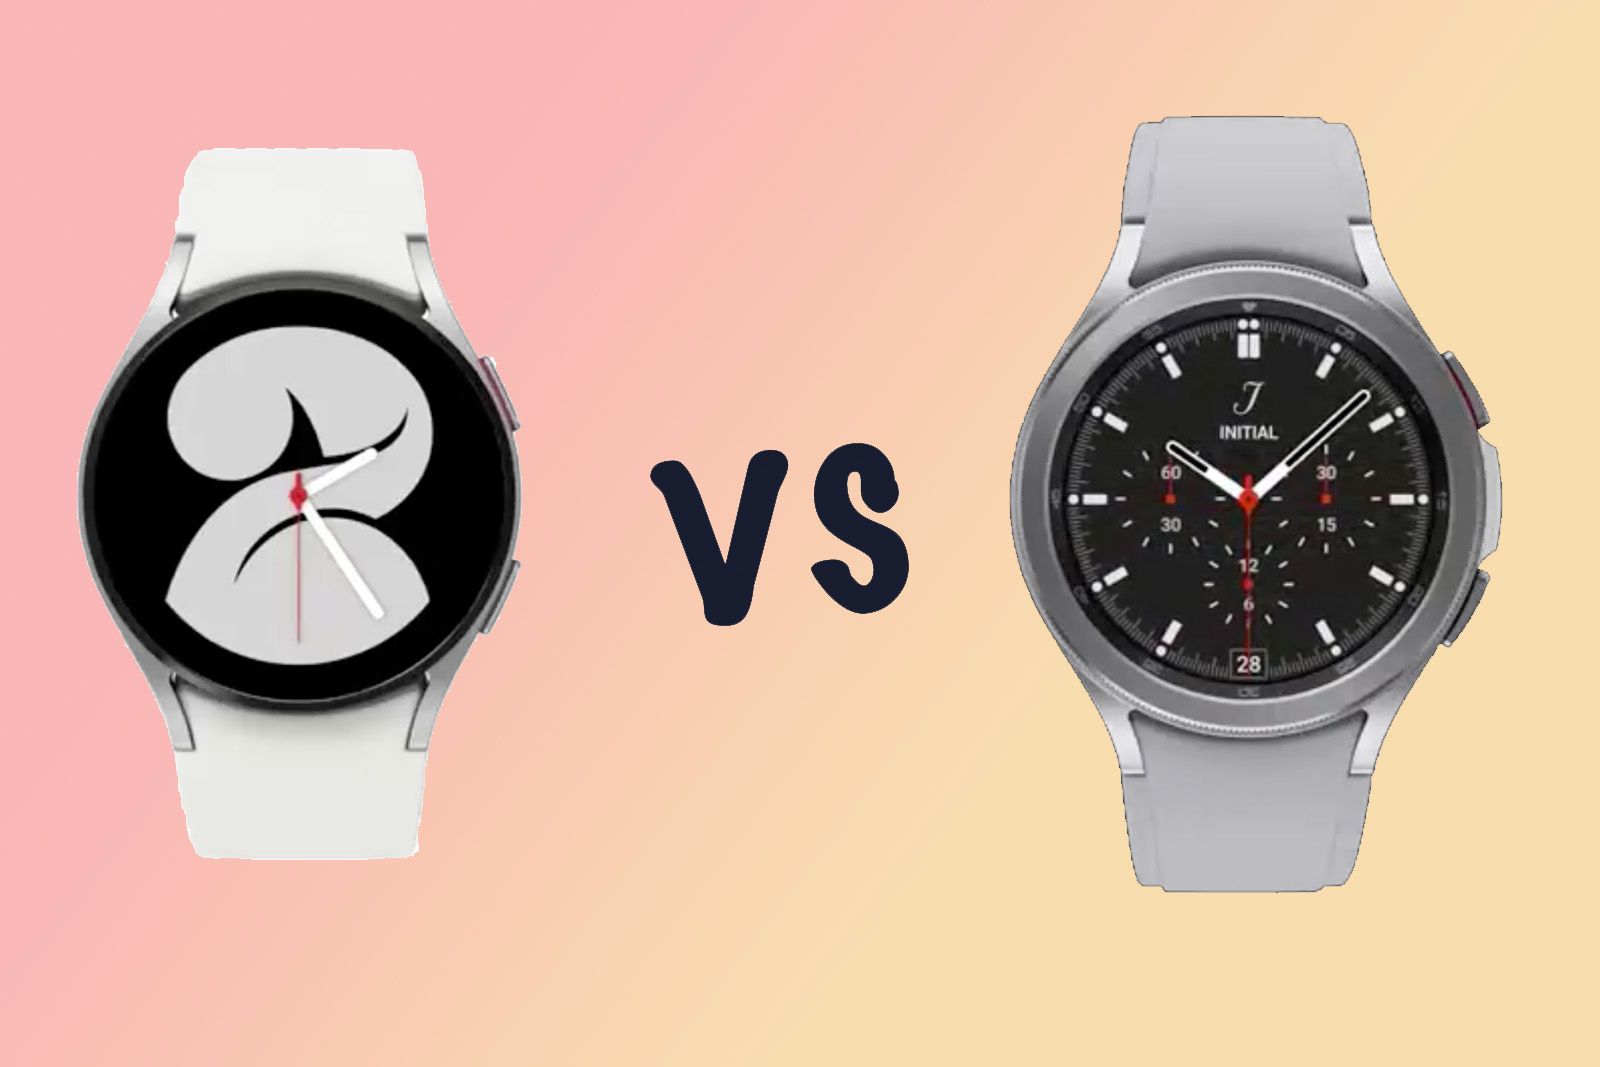 Samsung Galaxy Watch 4 vs 4 Classic: Differences compared